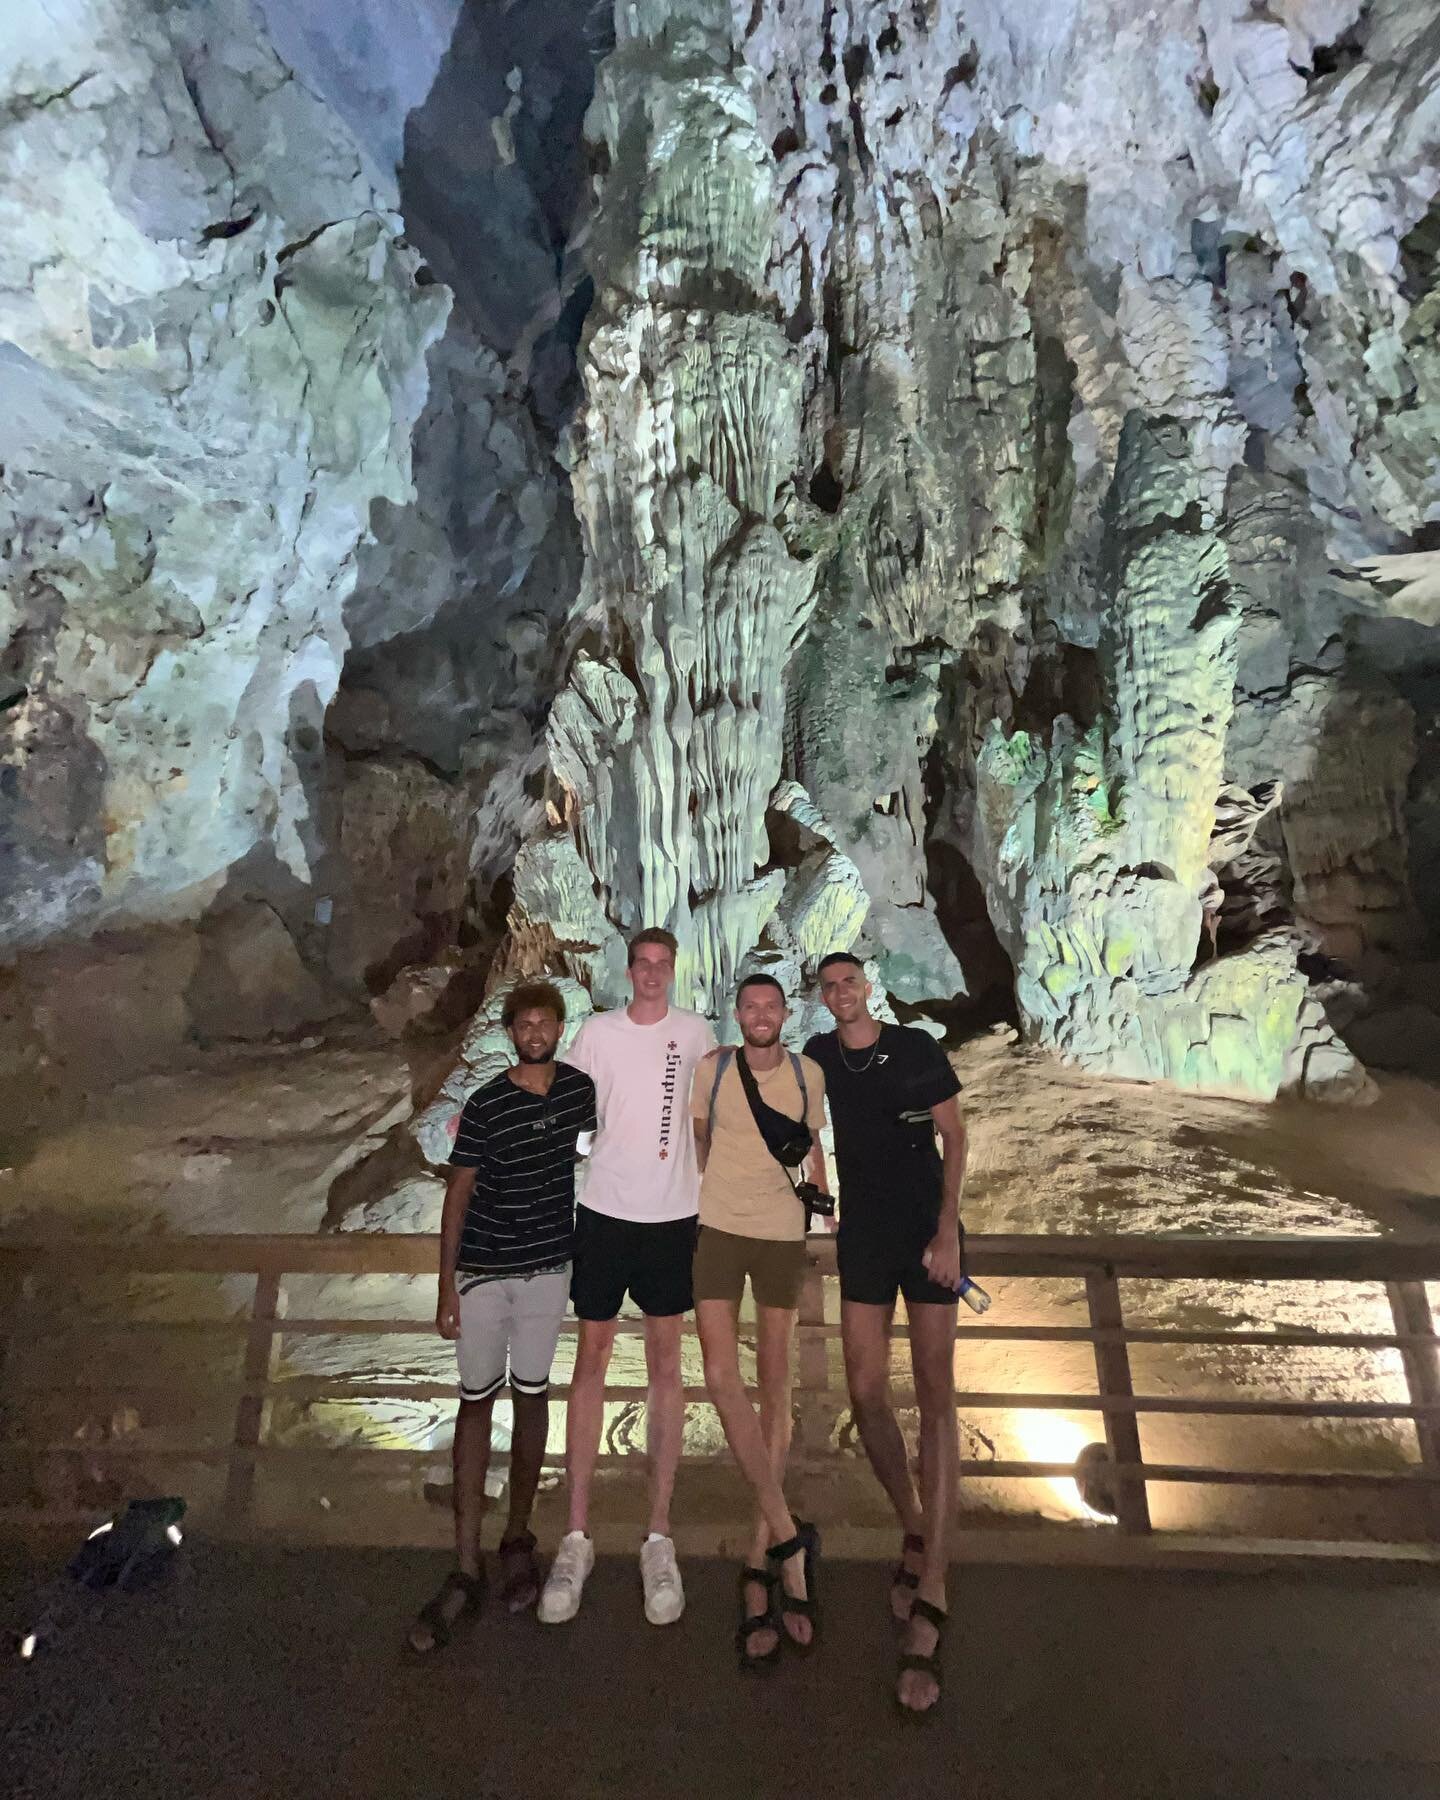 Phong Nha &mdash; &ldquo;The Adventure Capital of Southeast Asia&rdquo;

Paradise and Phong Nha Caves were dope, but the scooter ride in between was the highlight. Apparently I&rsquo;m not a big cave guy. Don&rsquo;t video and drive btw, bad idea. Te